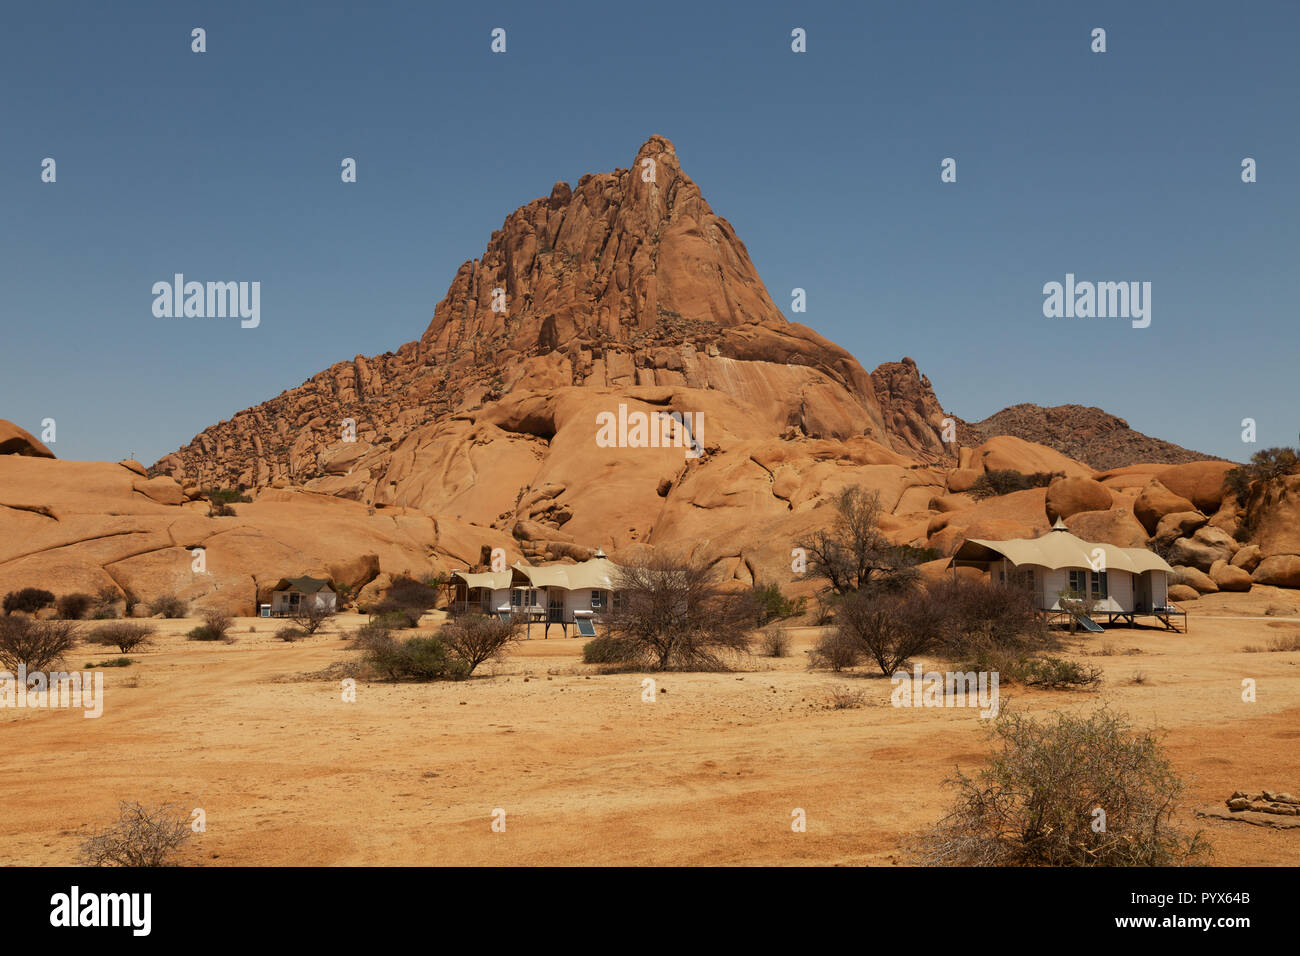 Chalets at Spitzkoppe Lodge, luxury tourist accommodation in the desert, Spitzkoppe, Namibia Africa Stock Photo